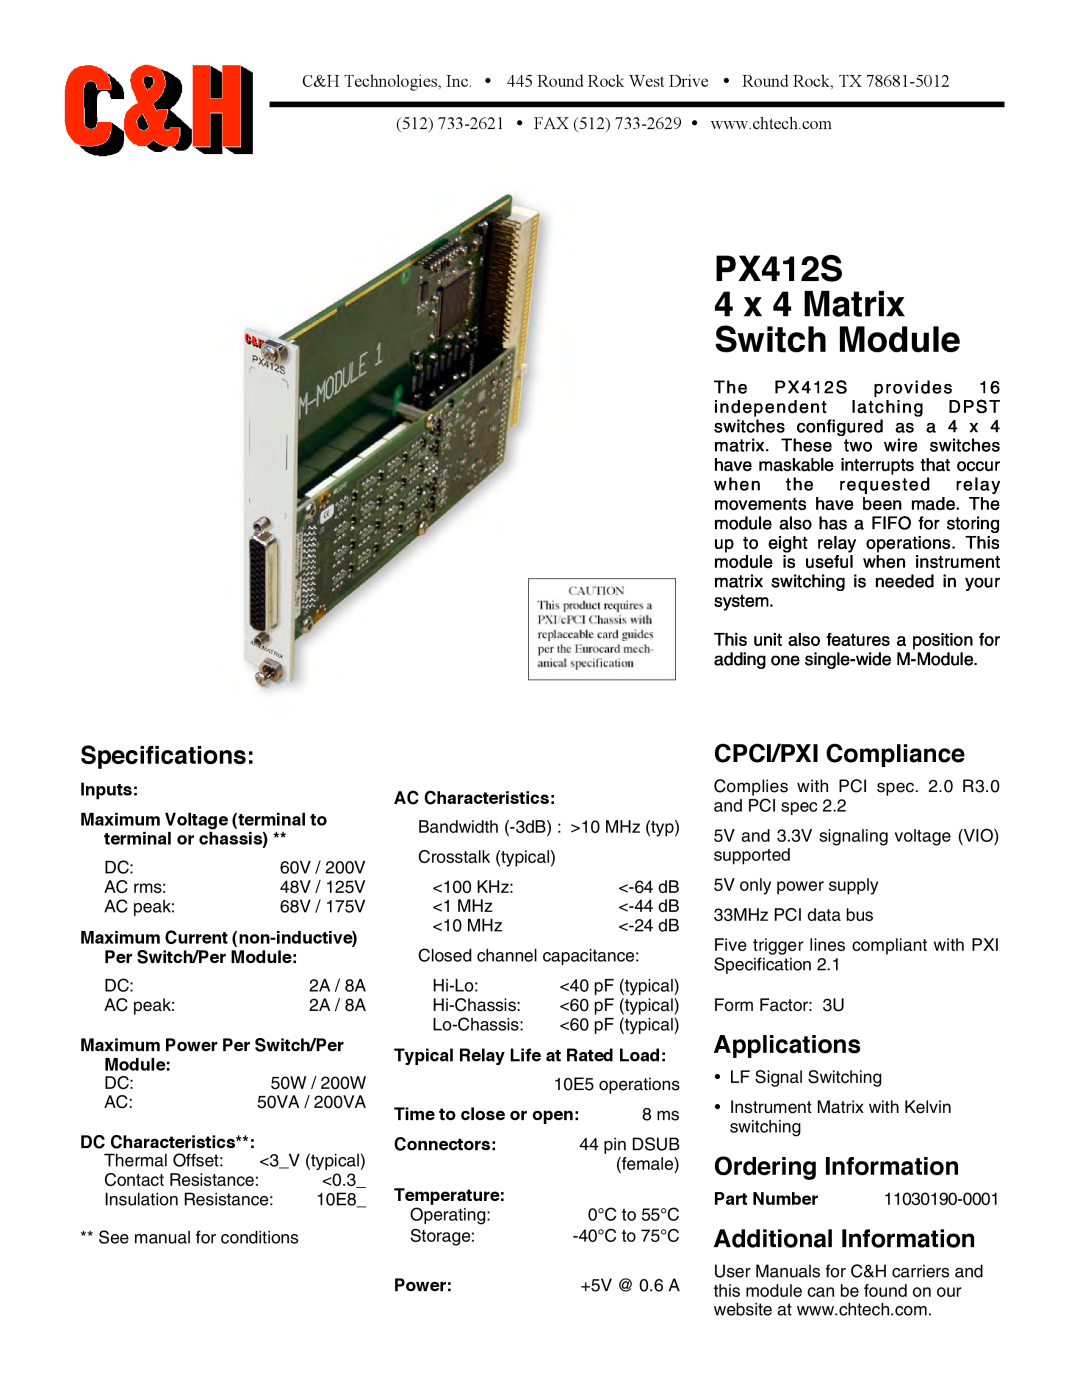 CH Tech specifications PX412S 4 x 4 Matrix Switch Module, Specifications, CPCI/PXI Compliance, Applications 